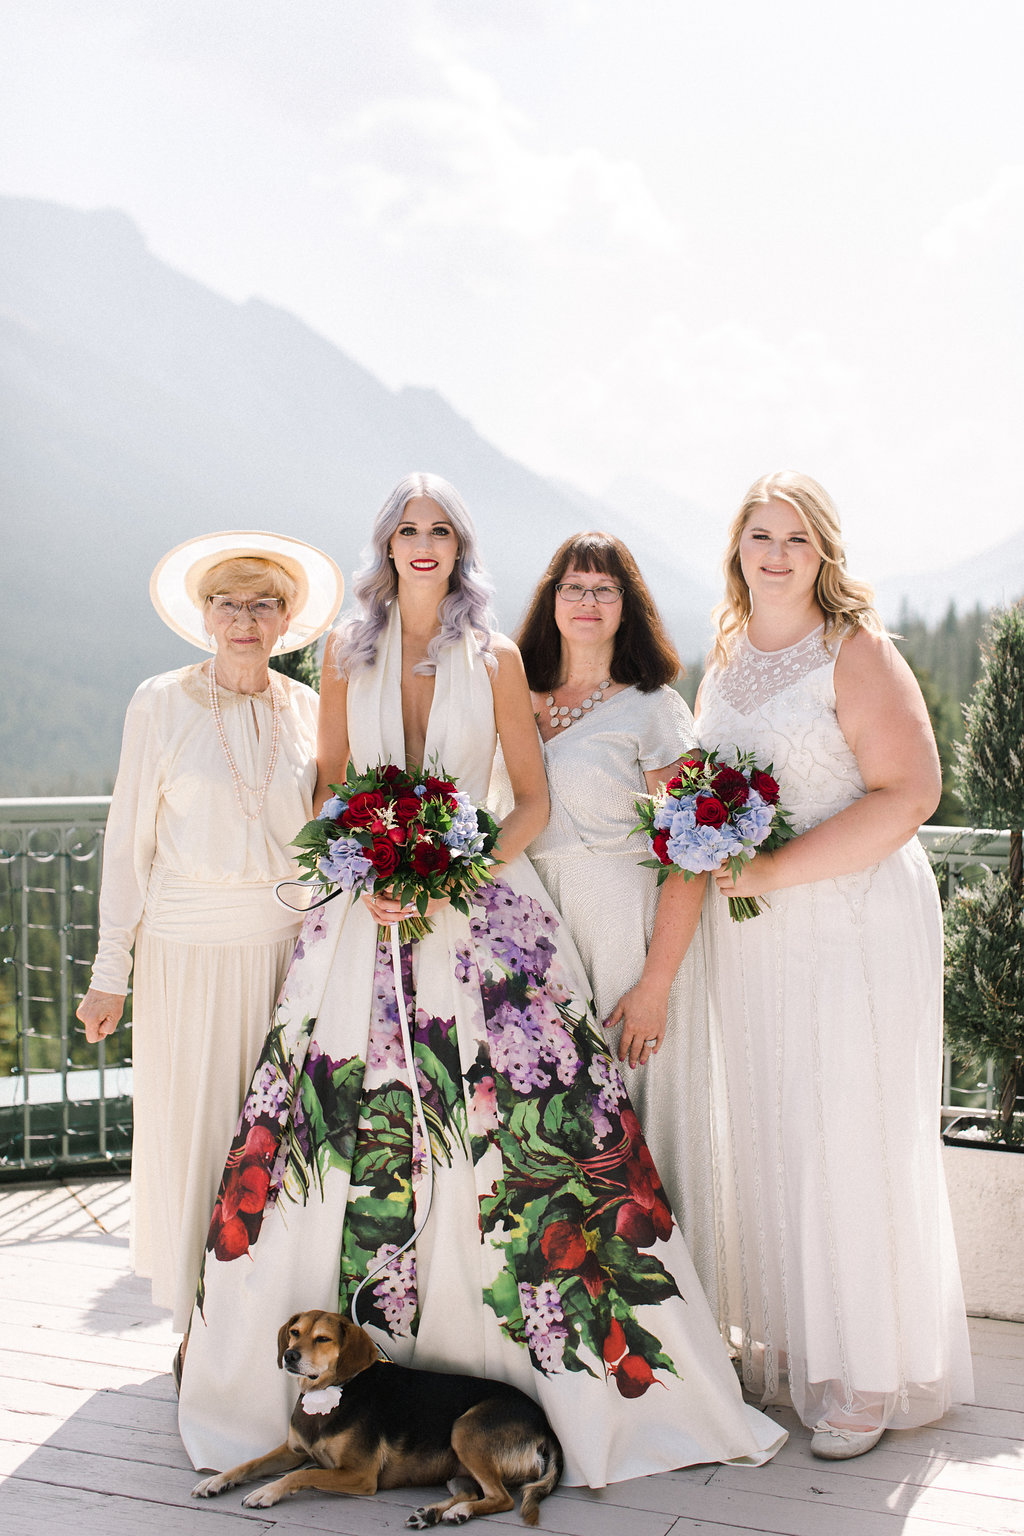 This Bride's Colourful Wedding Dress Will Have You Swooning at This Non-Traditional RimRock Resort Wedding in Banff